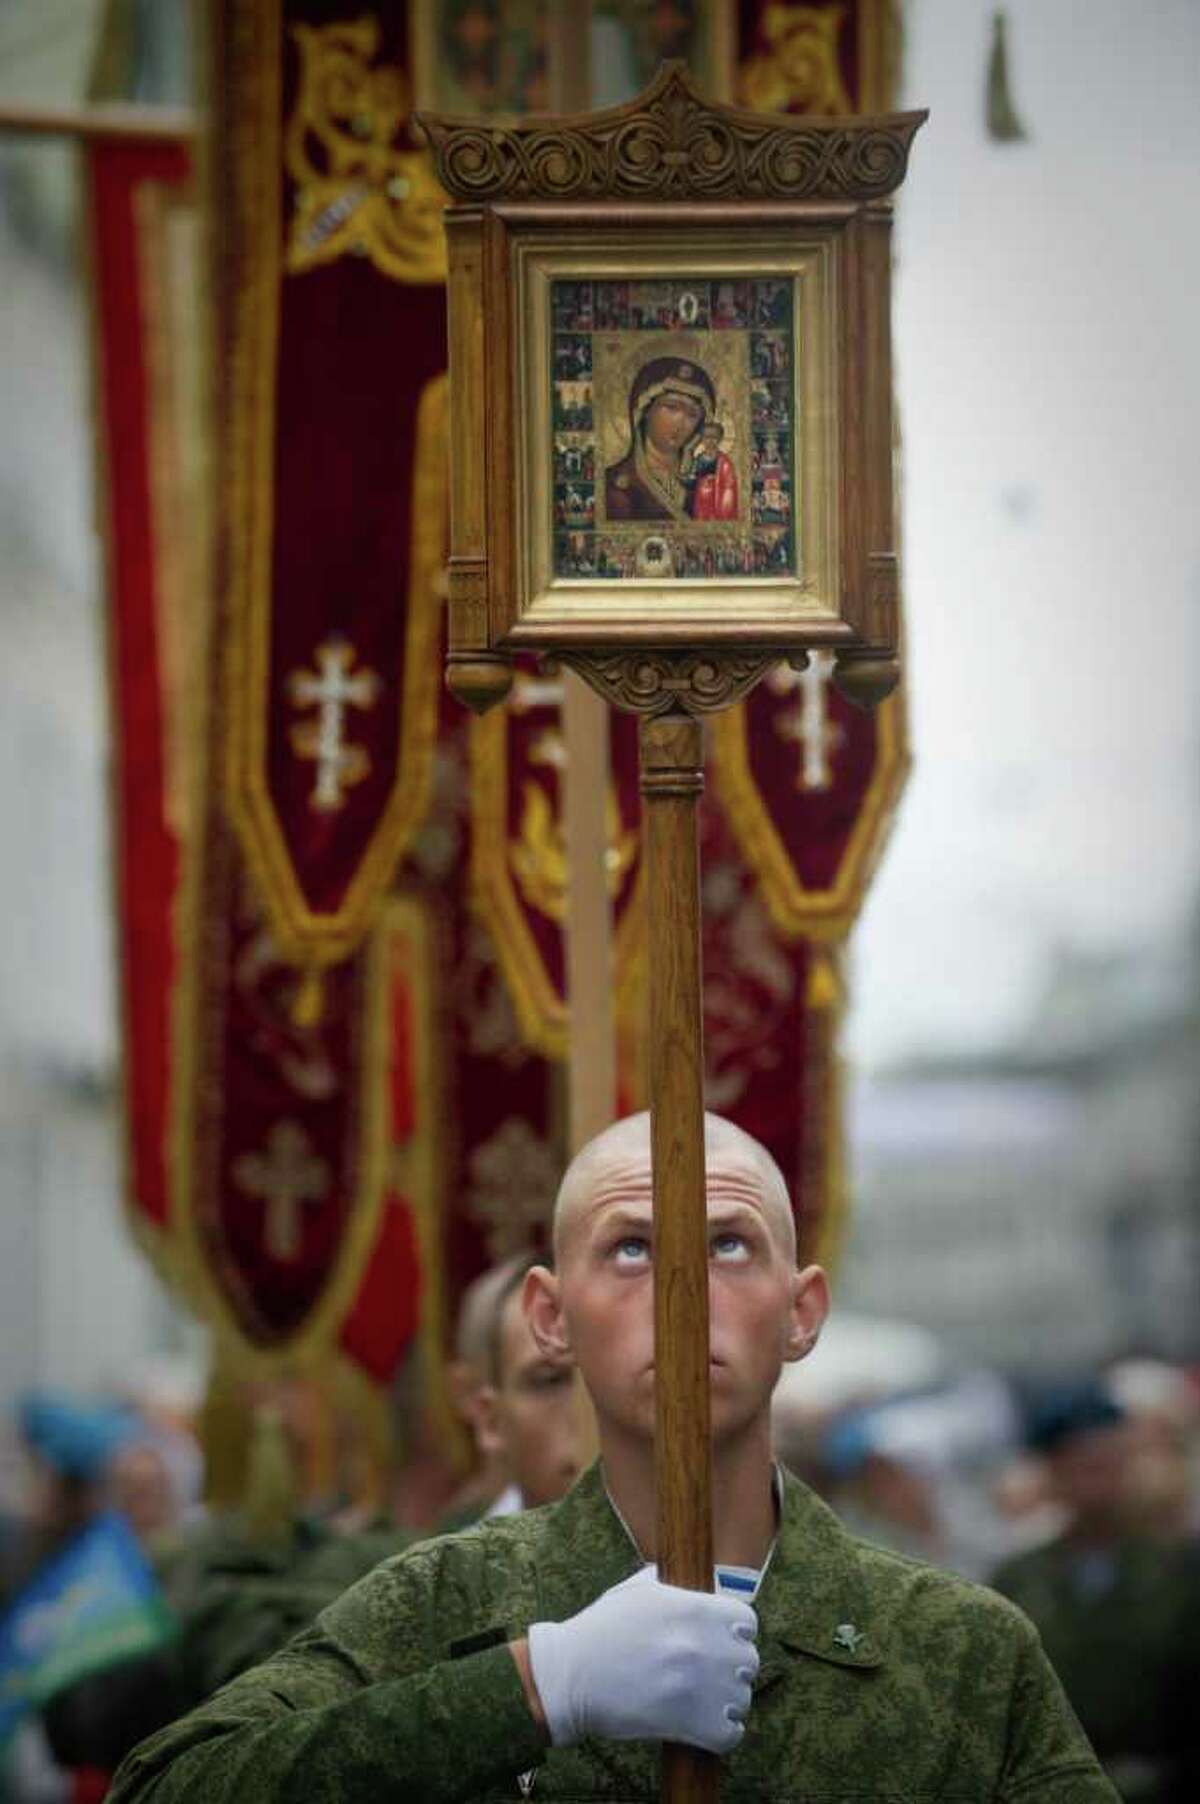 A Russian paratrooper carries a Russian Orthodox icon during a ceremony on Moscow's Red Square on August 2, 2011. Russians celebrated Paratroopers' Day on Tuesday, a tradition to honor the elite troops, carried over from Soviet times. AFP PHOTO / DMITRY KOSTYUKOV